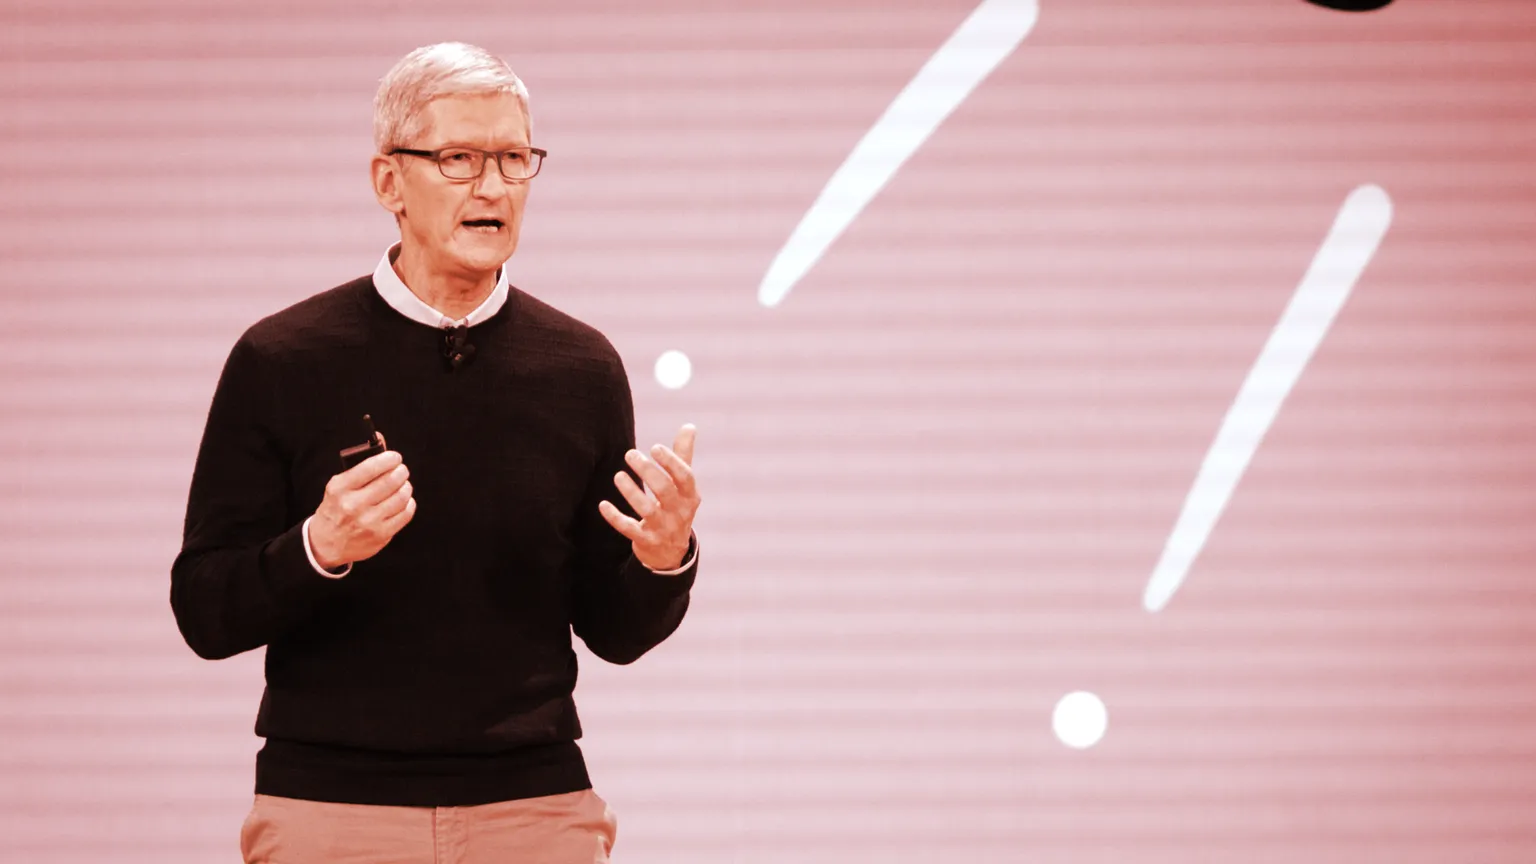 Tim Cook is the CEO of Apple. Image: Shutterstock